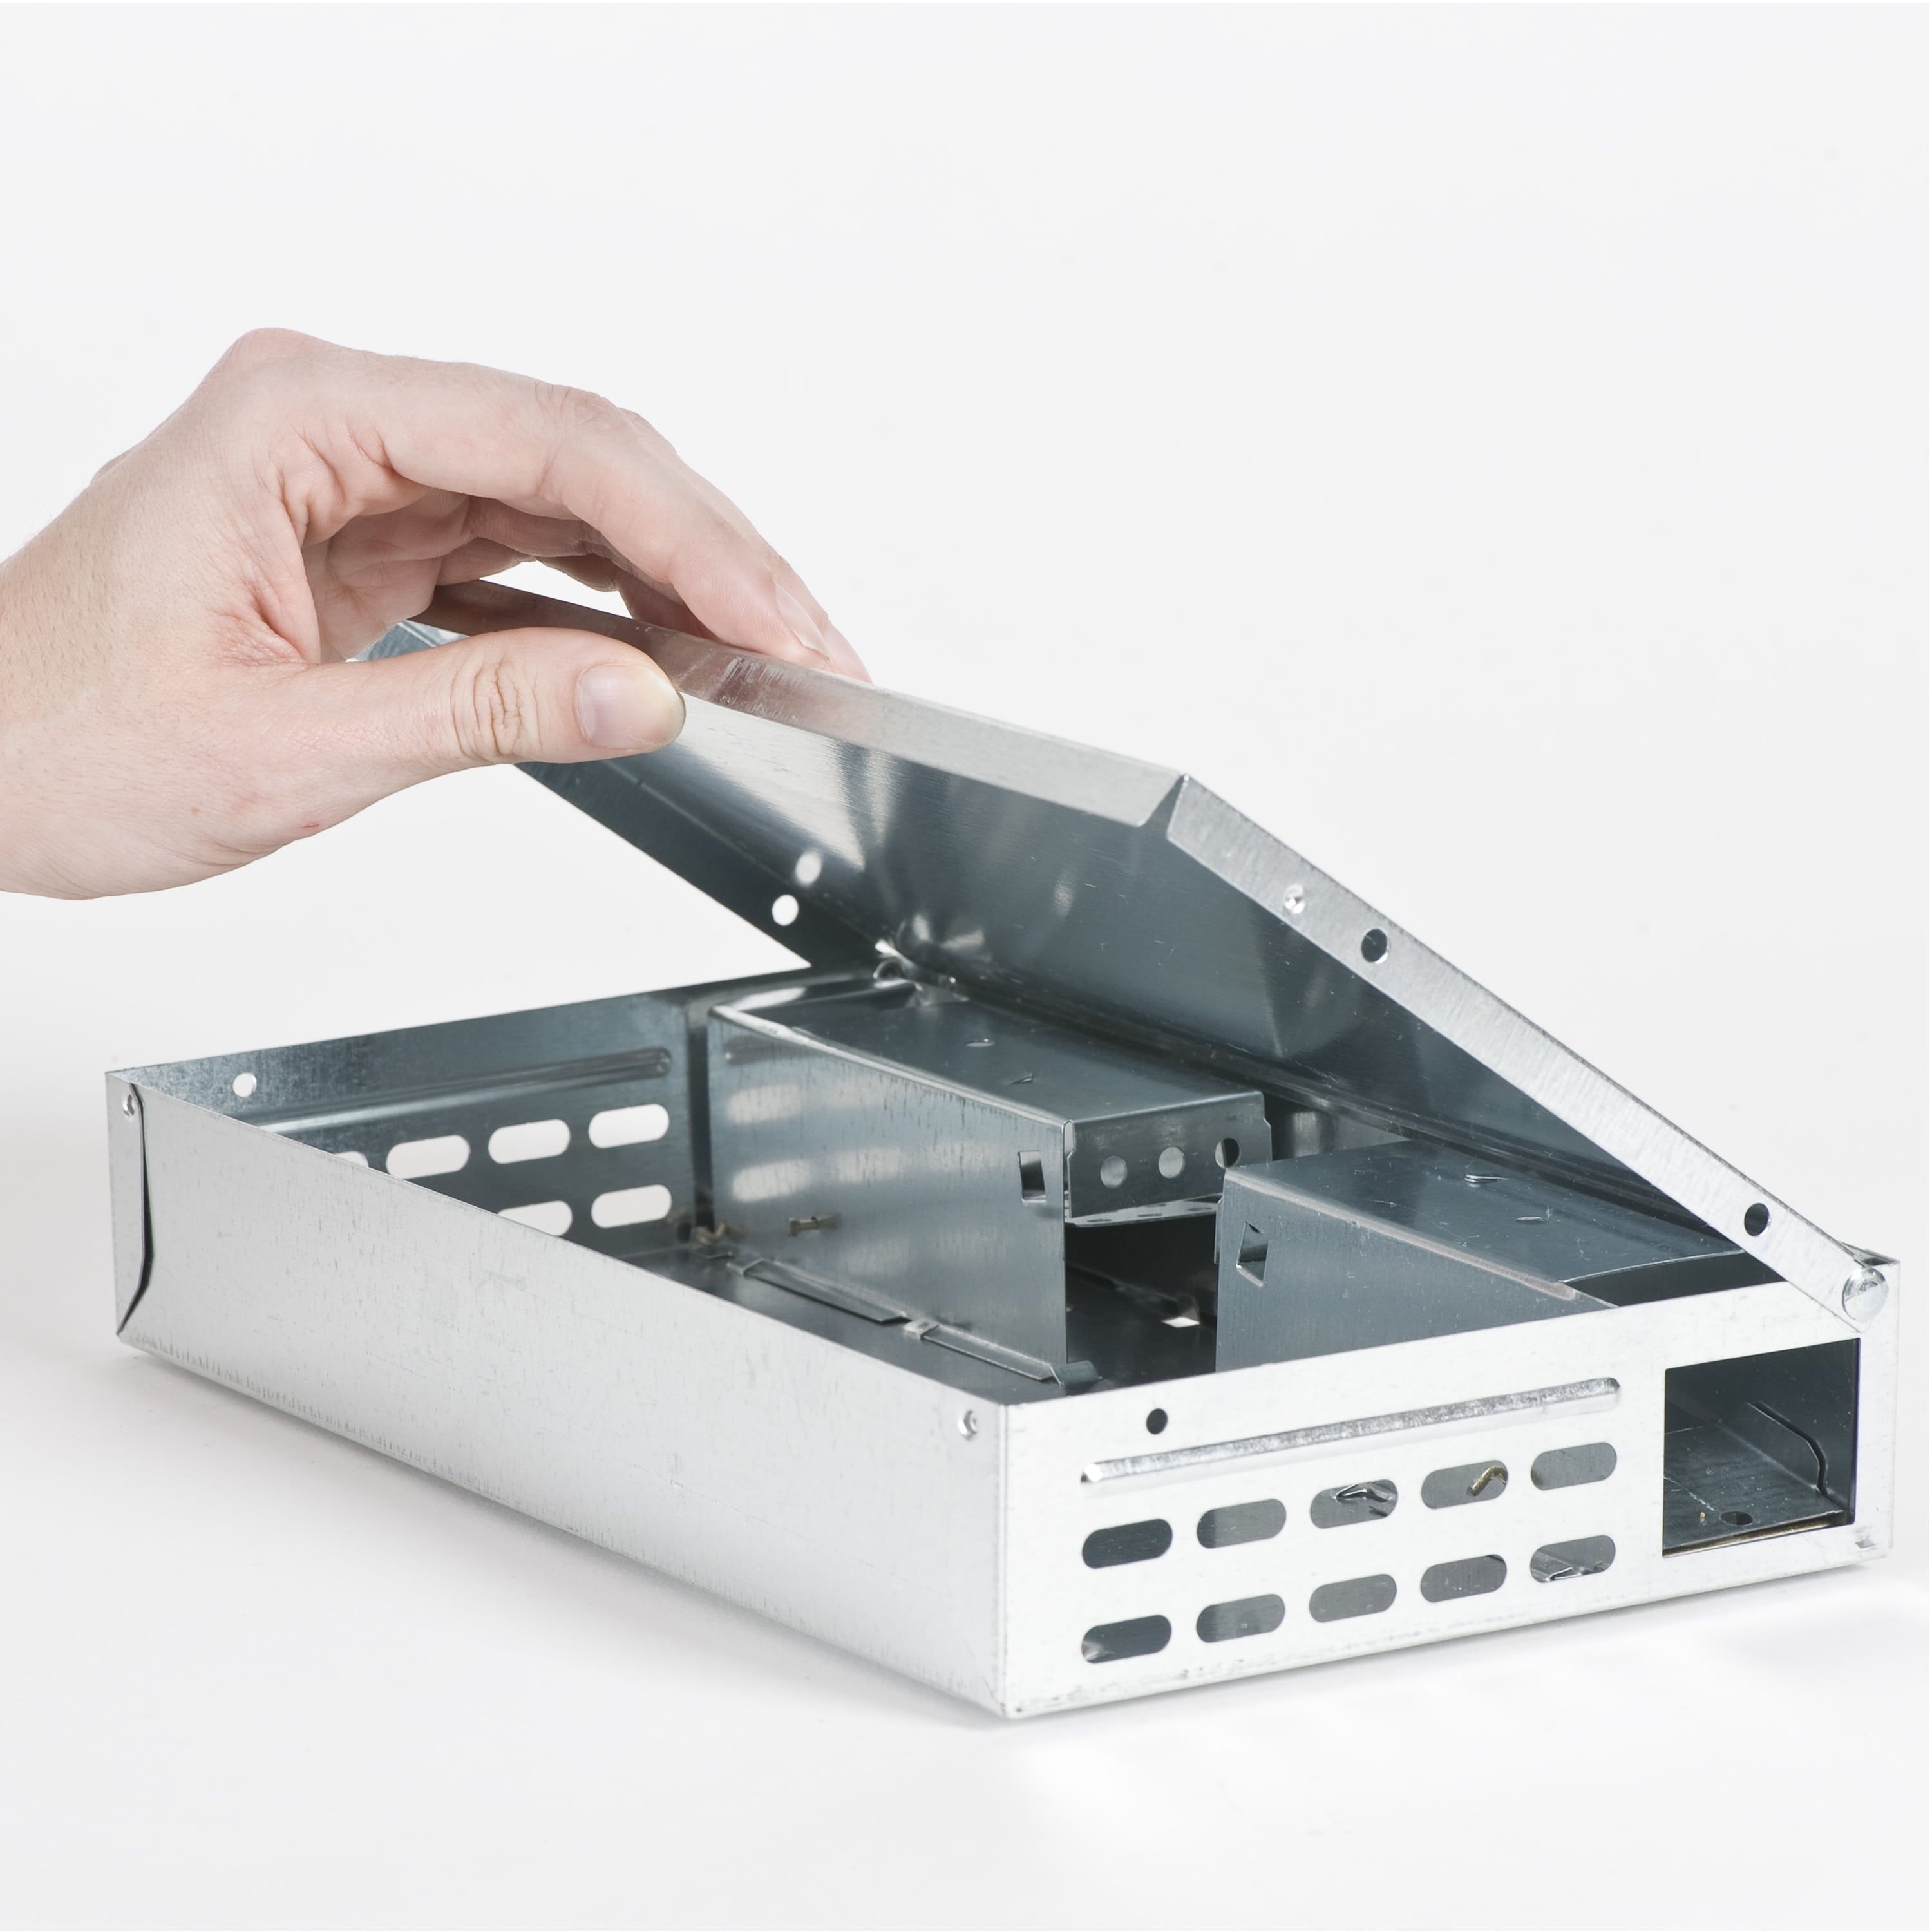 Victor® Live Catch Mouse Trap